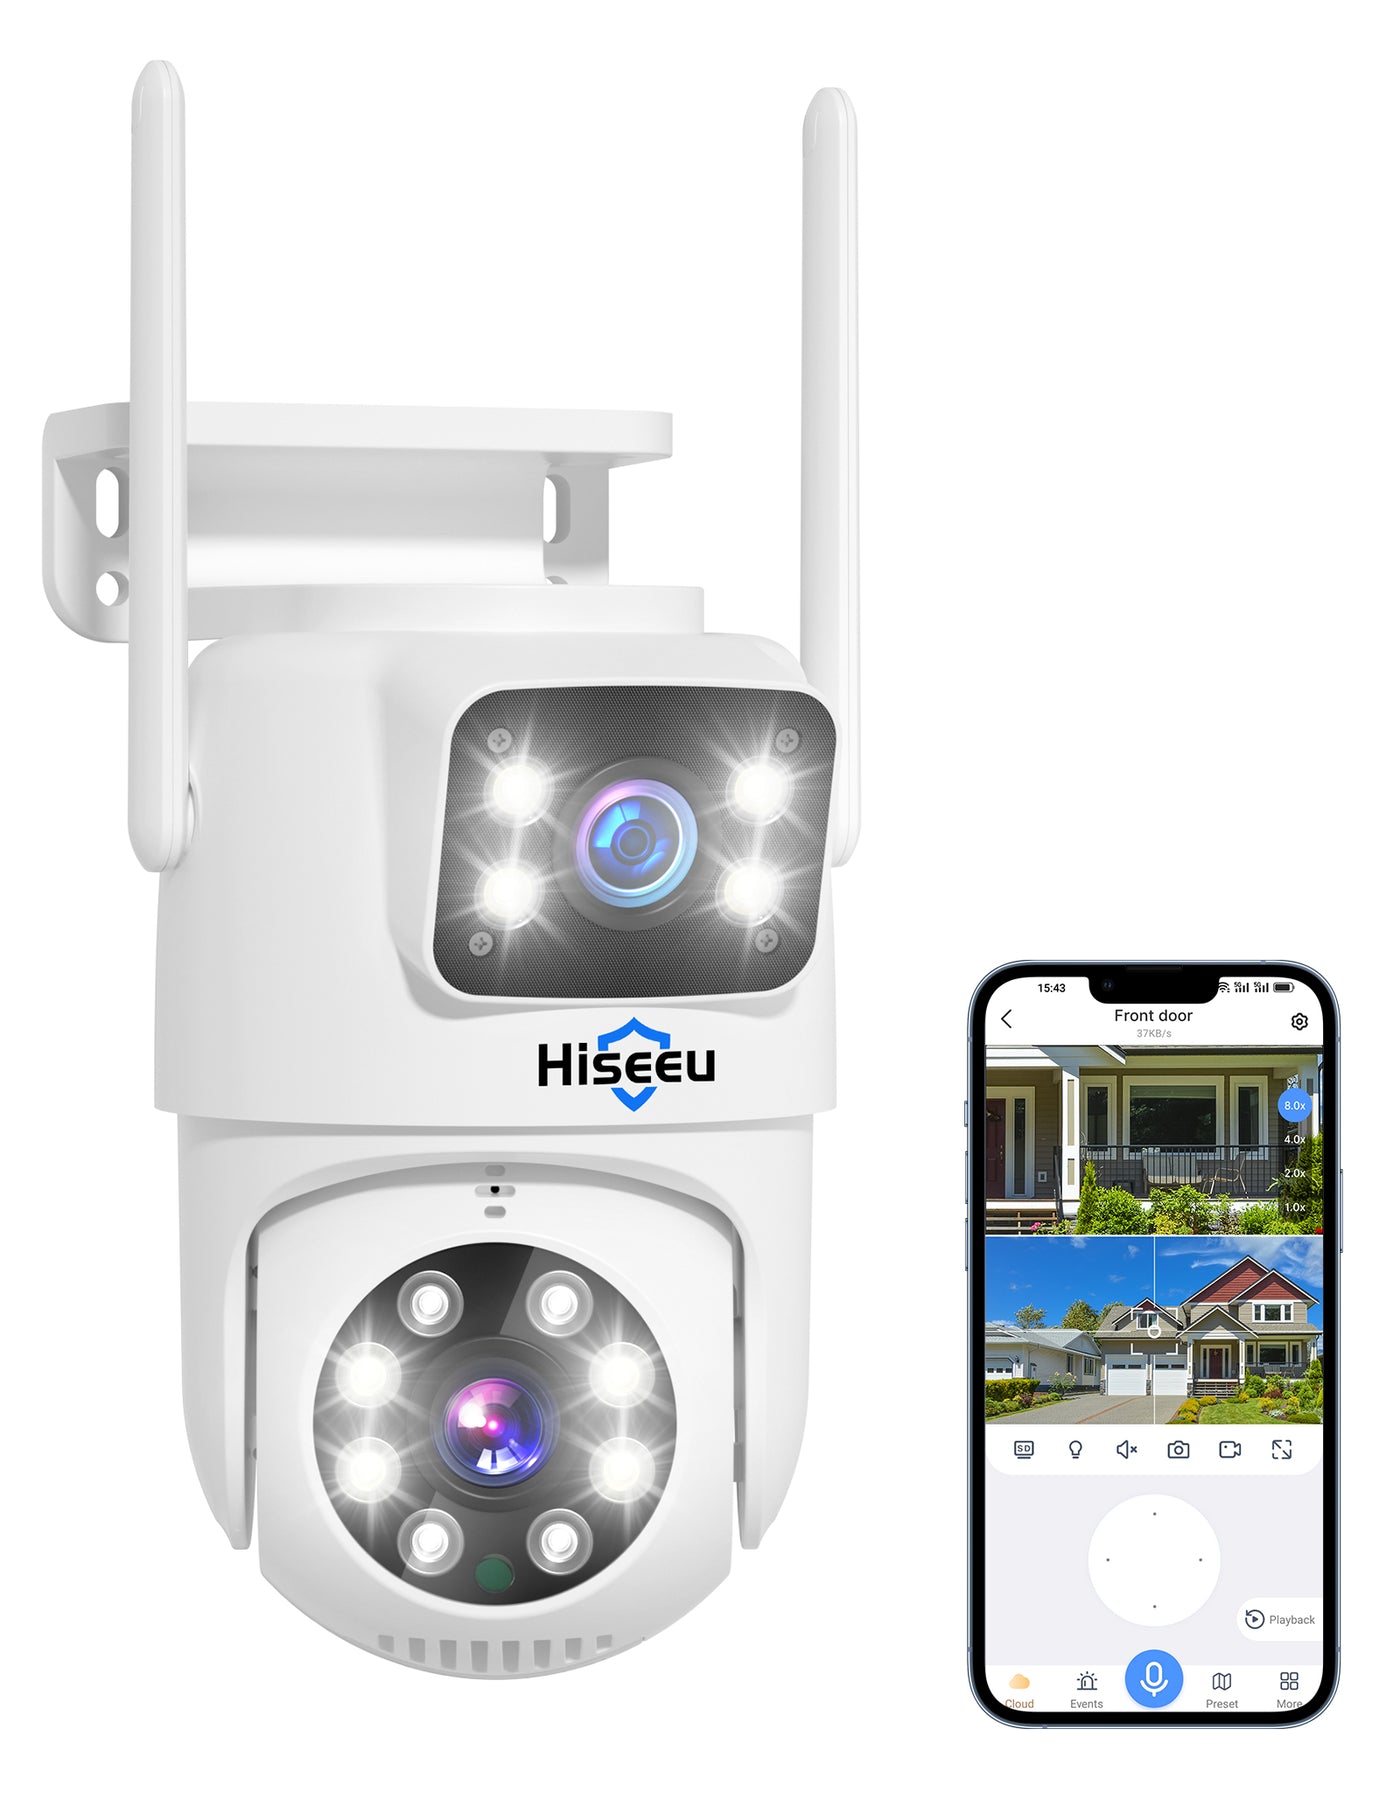 Hiseeu Wireless Security Camera 4MP Dual Lens 5G/2.4G WiFi-Pro Power Cord,IP65 Waterproof Motion Tracking,Color Night Version, No-Monthly Fees Works with Wireless Camera System